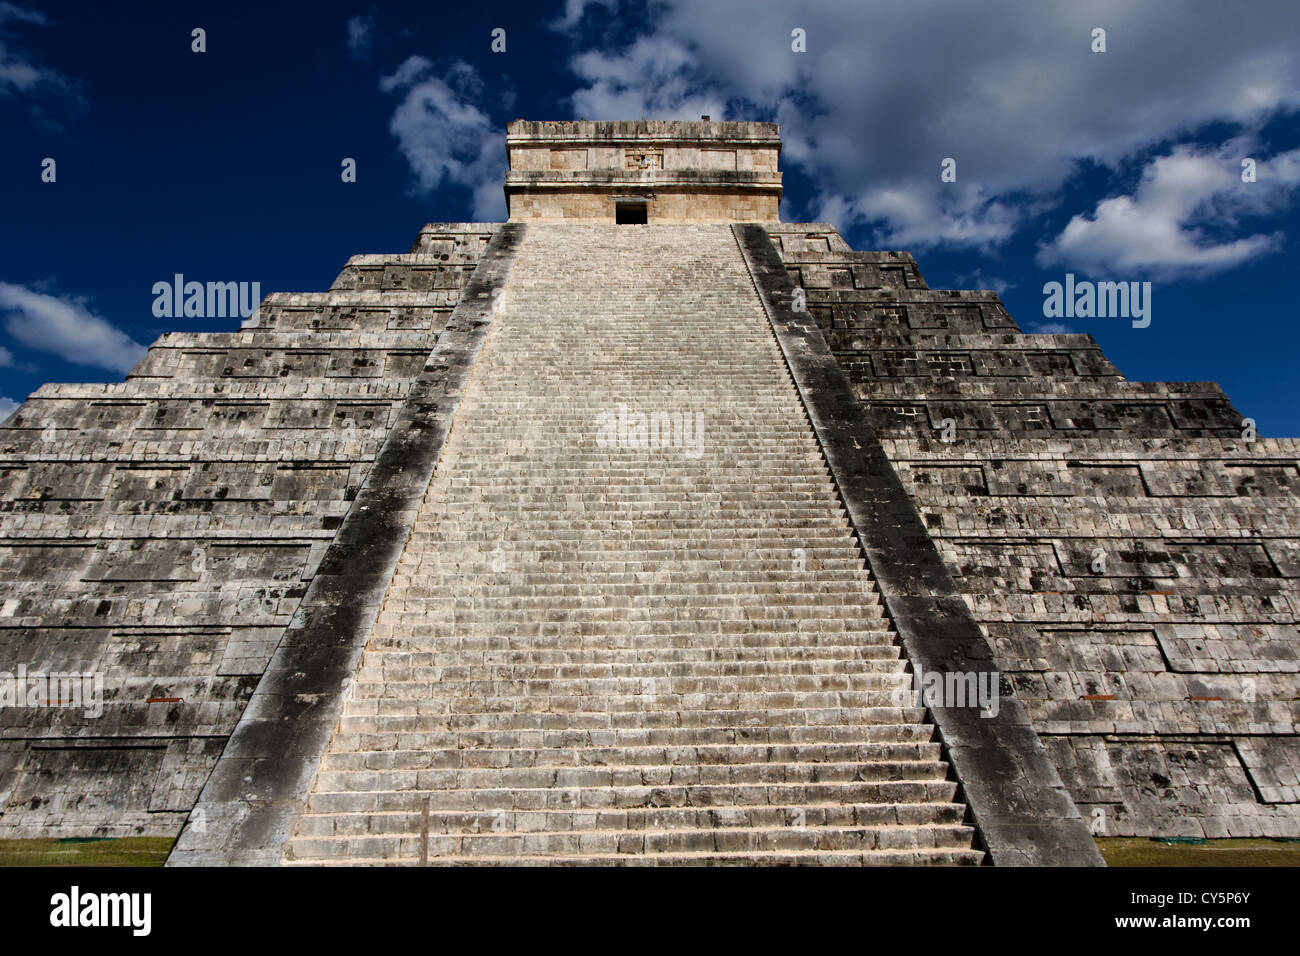 View up the stairs of a Mayan Pyramid to the god Kukulkan, the feathered serpent, at Chichen Itza, Yucatan, Mexico. Stock Photo